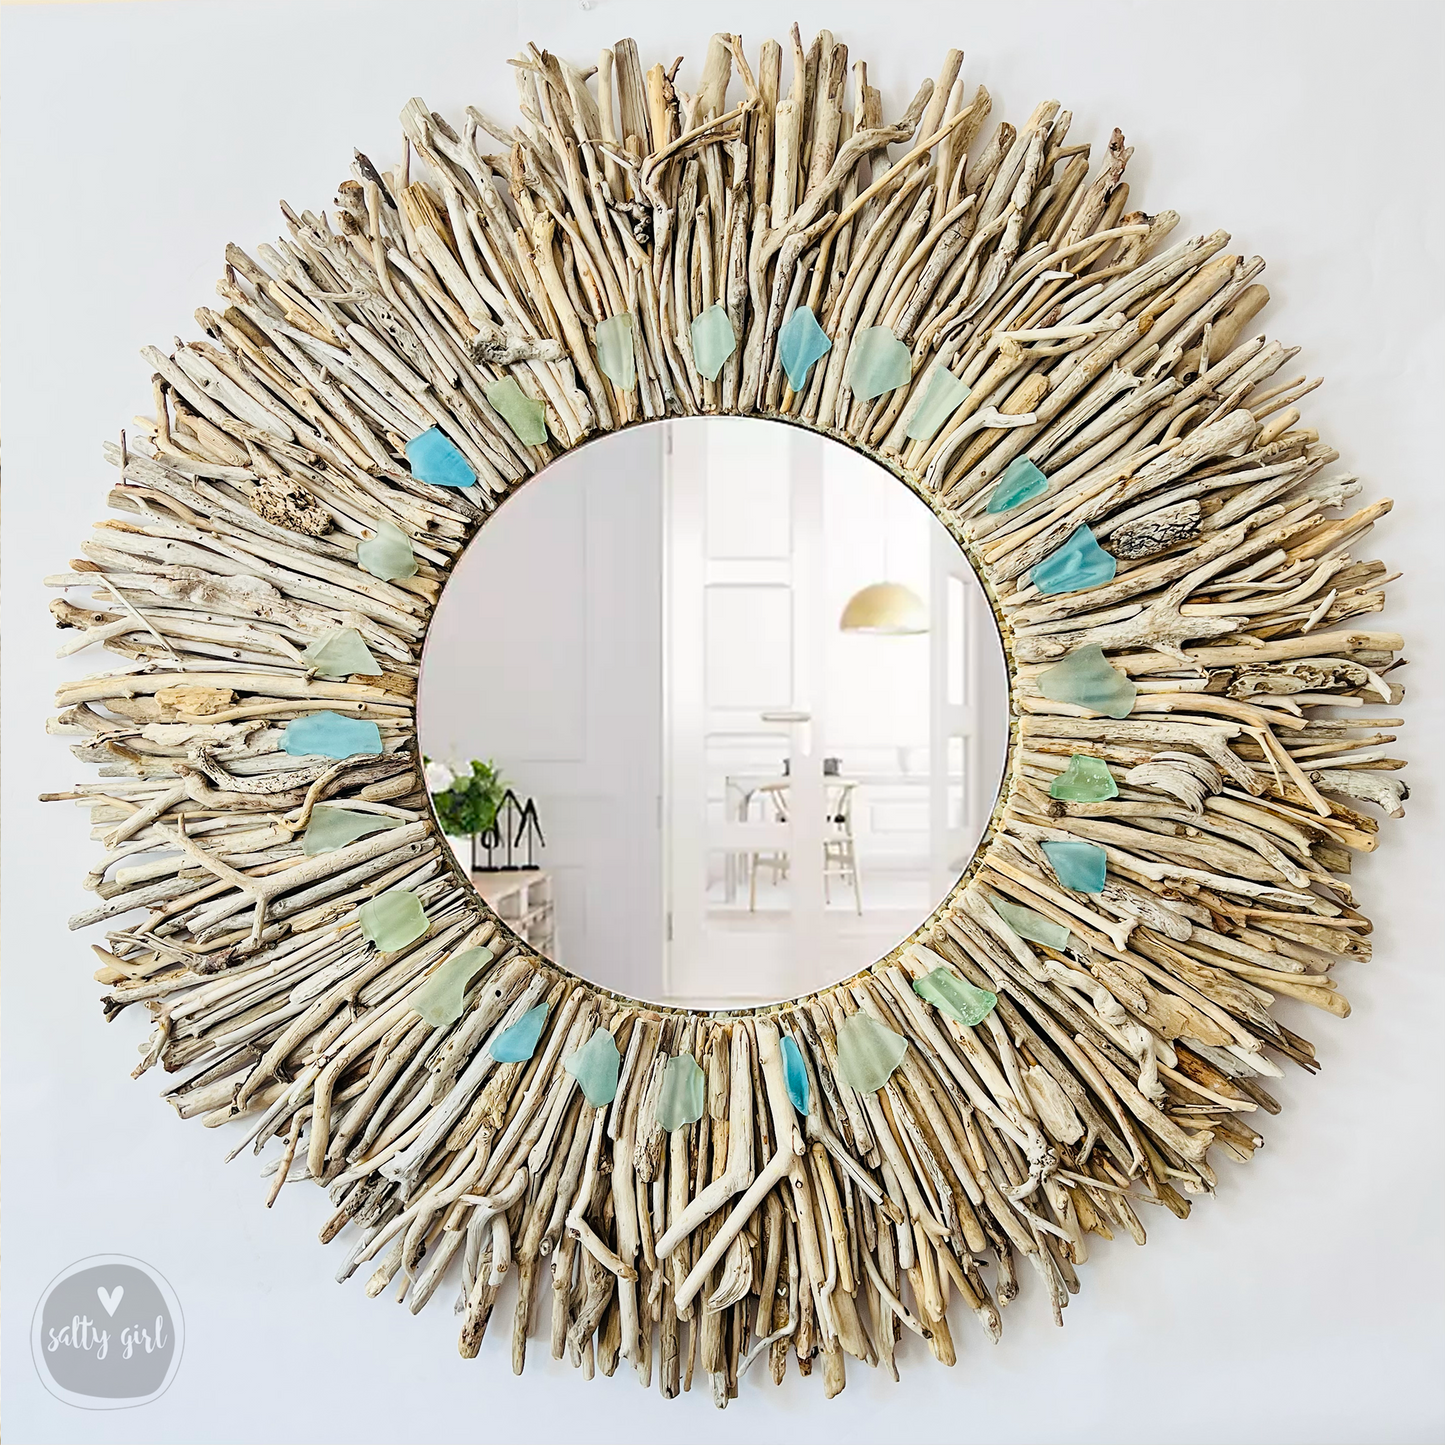 Driftwood Wreath Wall Decor with Natural Sun-Bleached Tones 30 - 42"